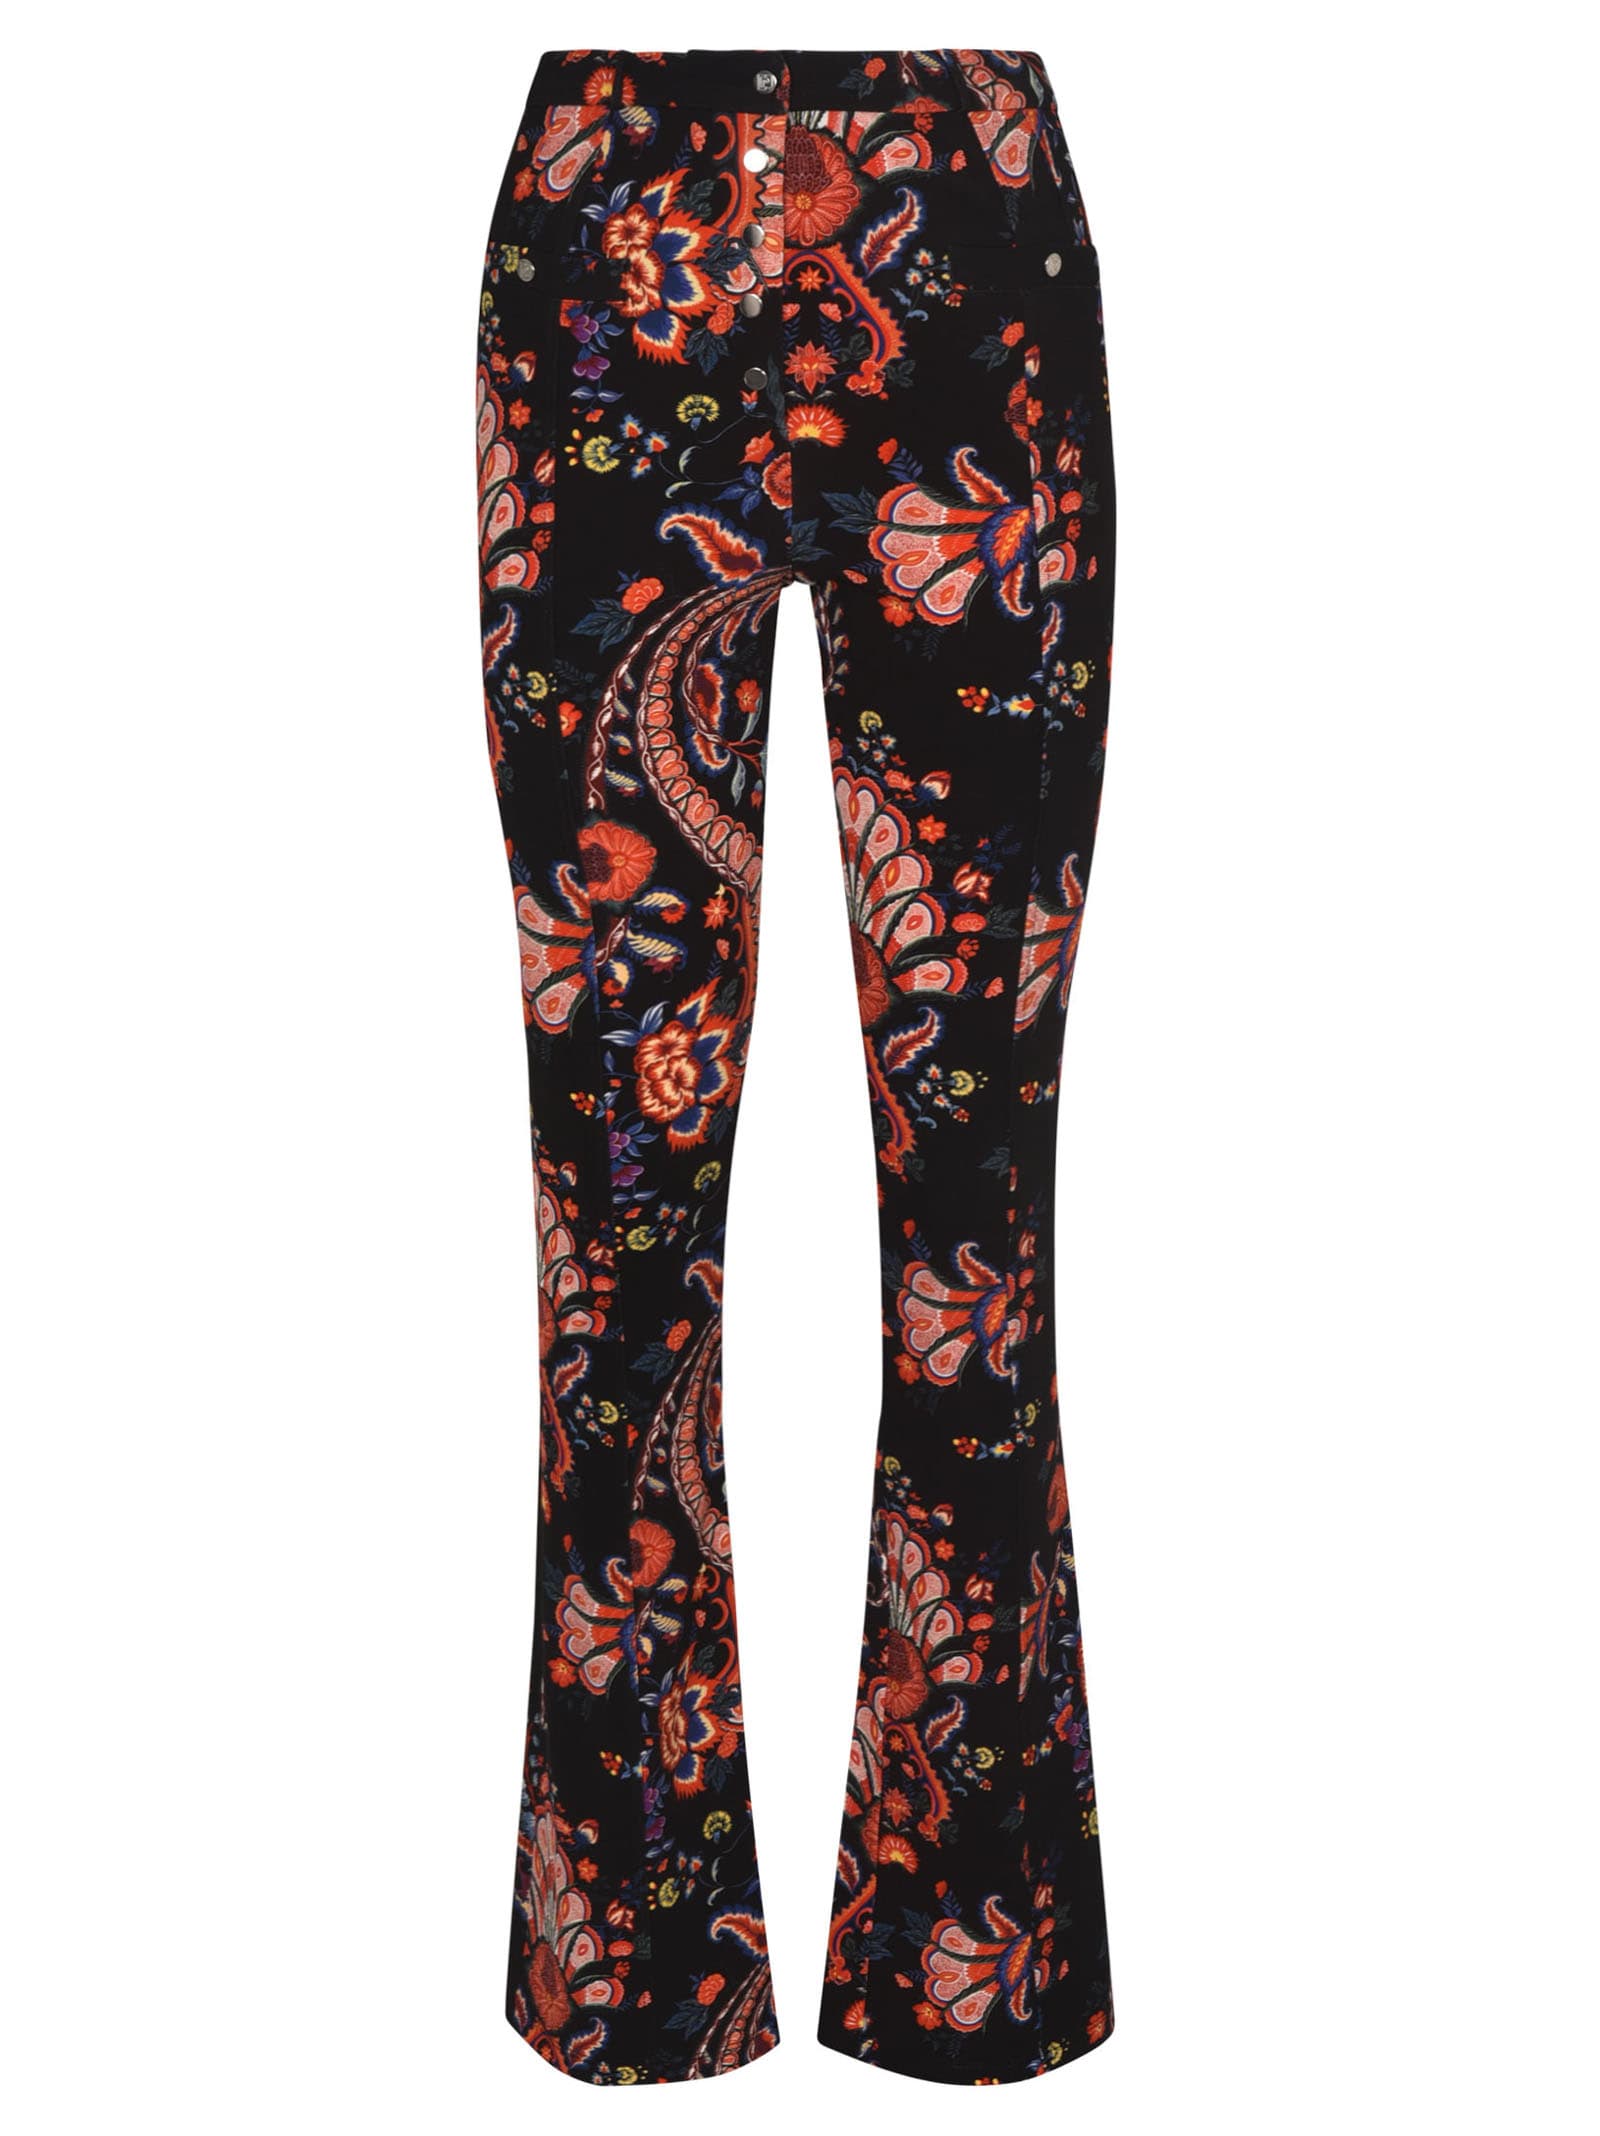 Paco Rabanne Floral Printed Trousers